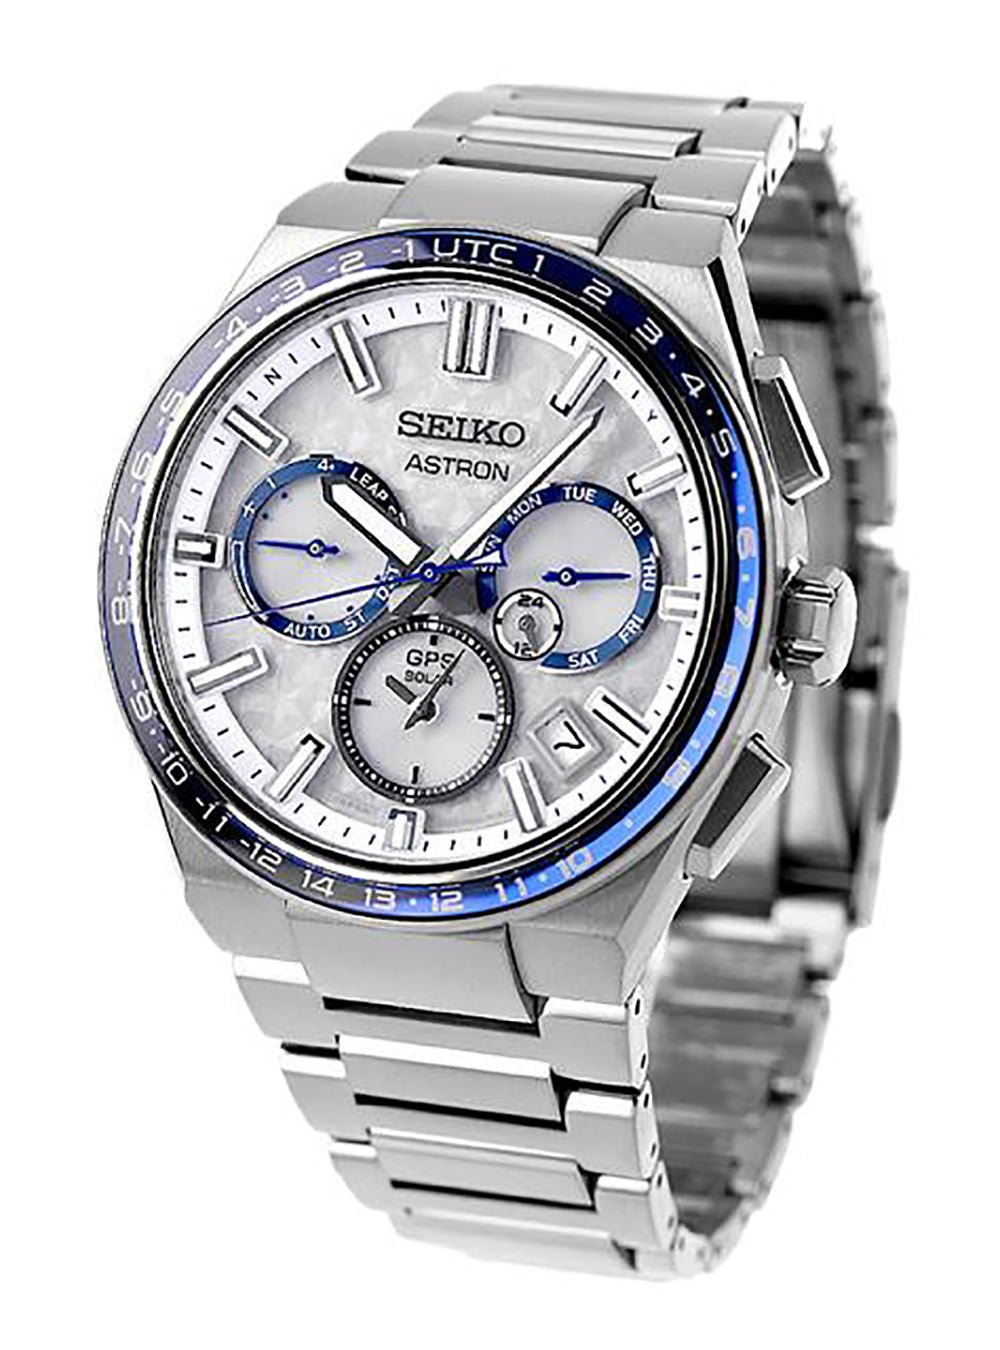 SEIKO ASTRON GPS SOLAR. THE ULTIMATE IN PRECISION AND PERFORMANCE, NOW IN A  NEW DESIGN FOR THE NEXT GENERATION.